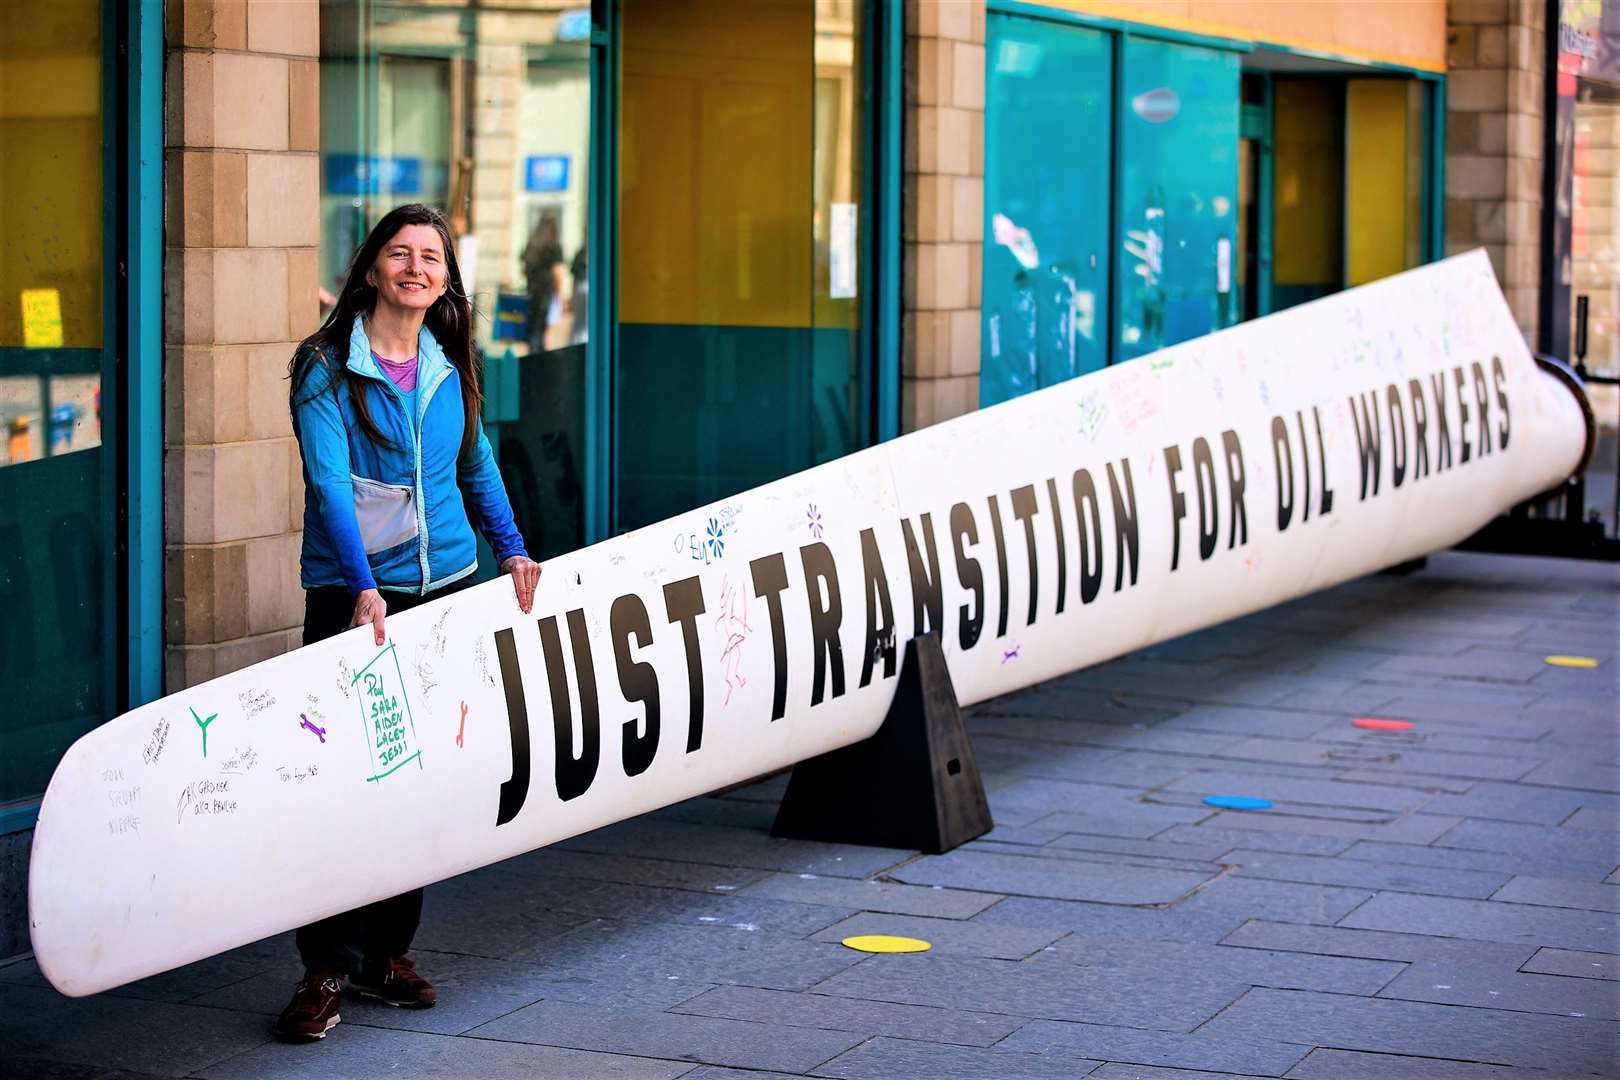 Green Party MSP for the Highlands and Islands Ariane Burgess in front of a wind turbine blade which was placed in Inverness Eastgate to campaign for a just transition for oil workers to renewable energy.